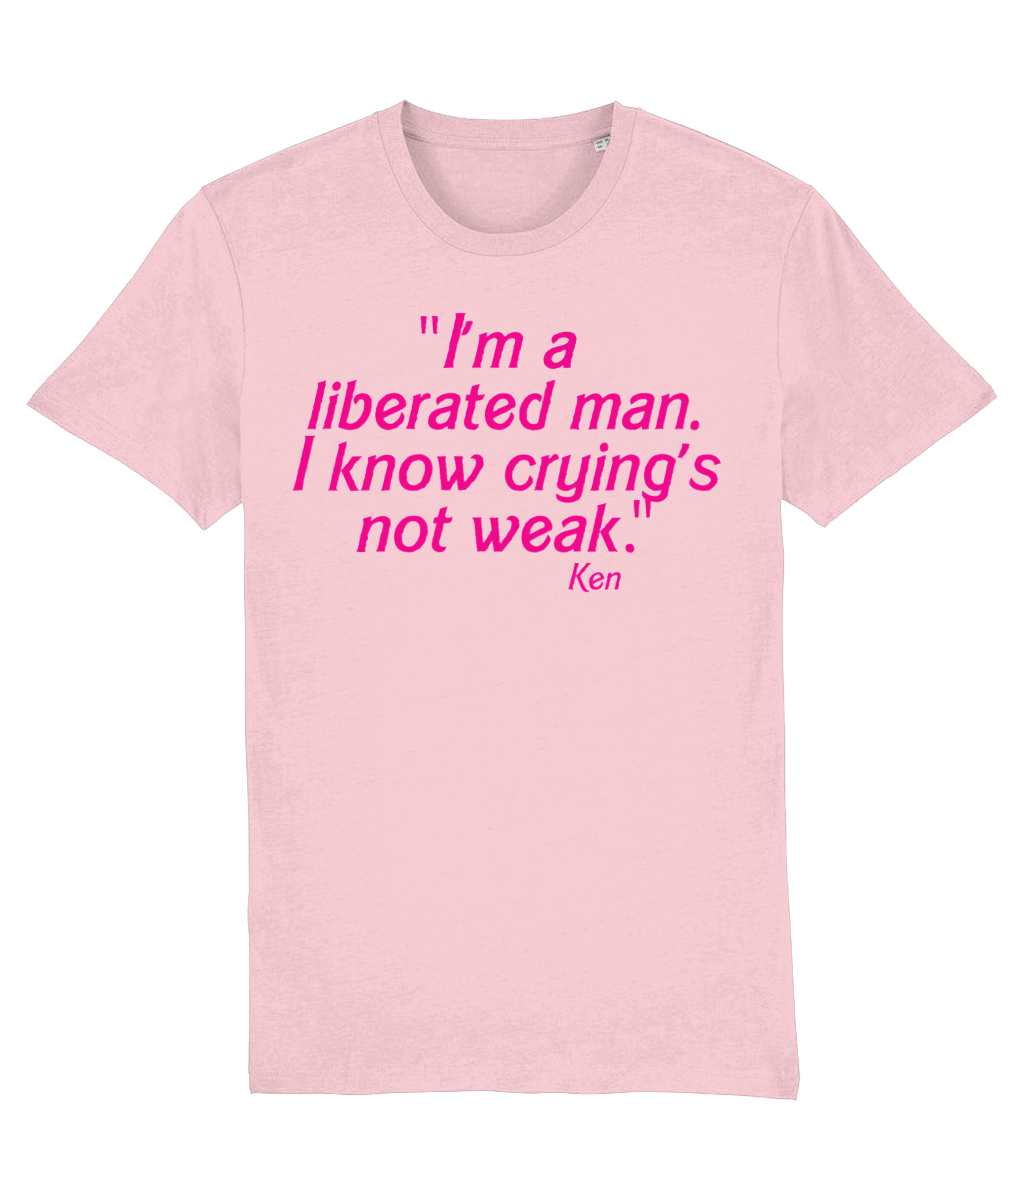 I'm a liberated man. I know crying's not weak tshirt